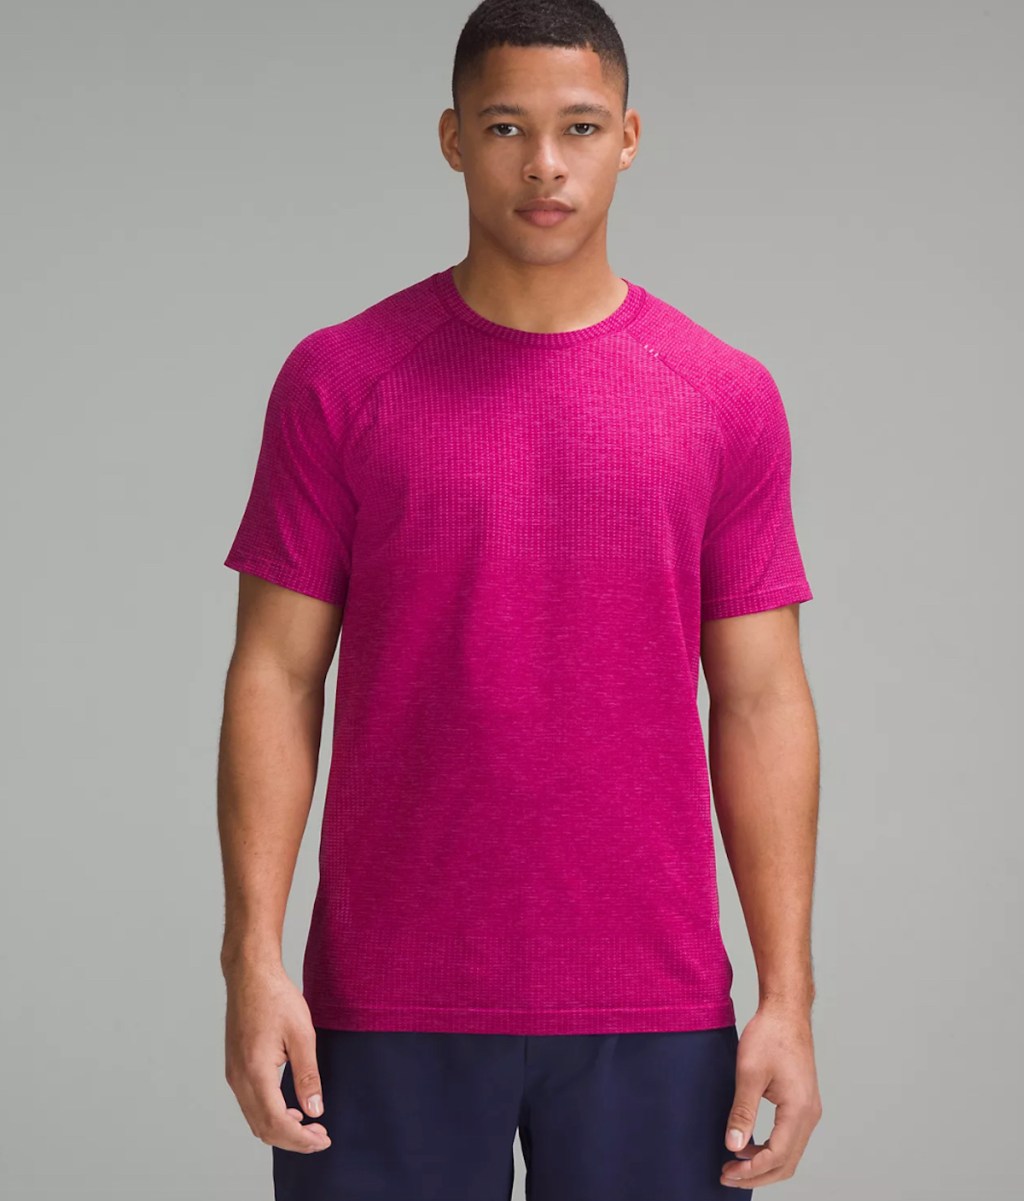 man wearing hot pink shirt with gray background